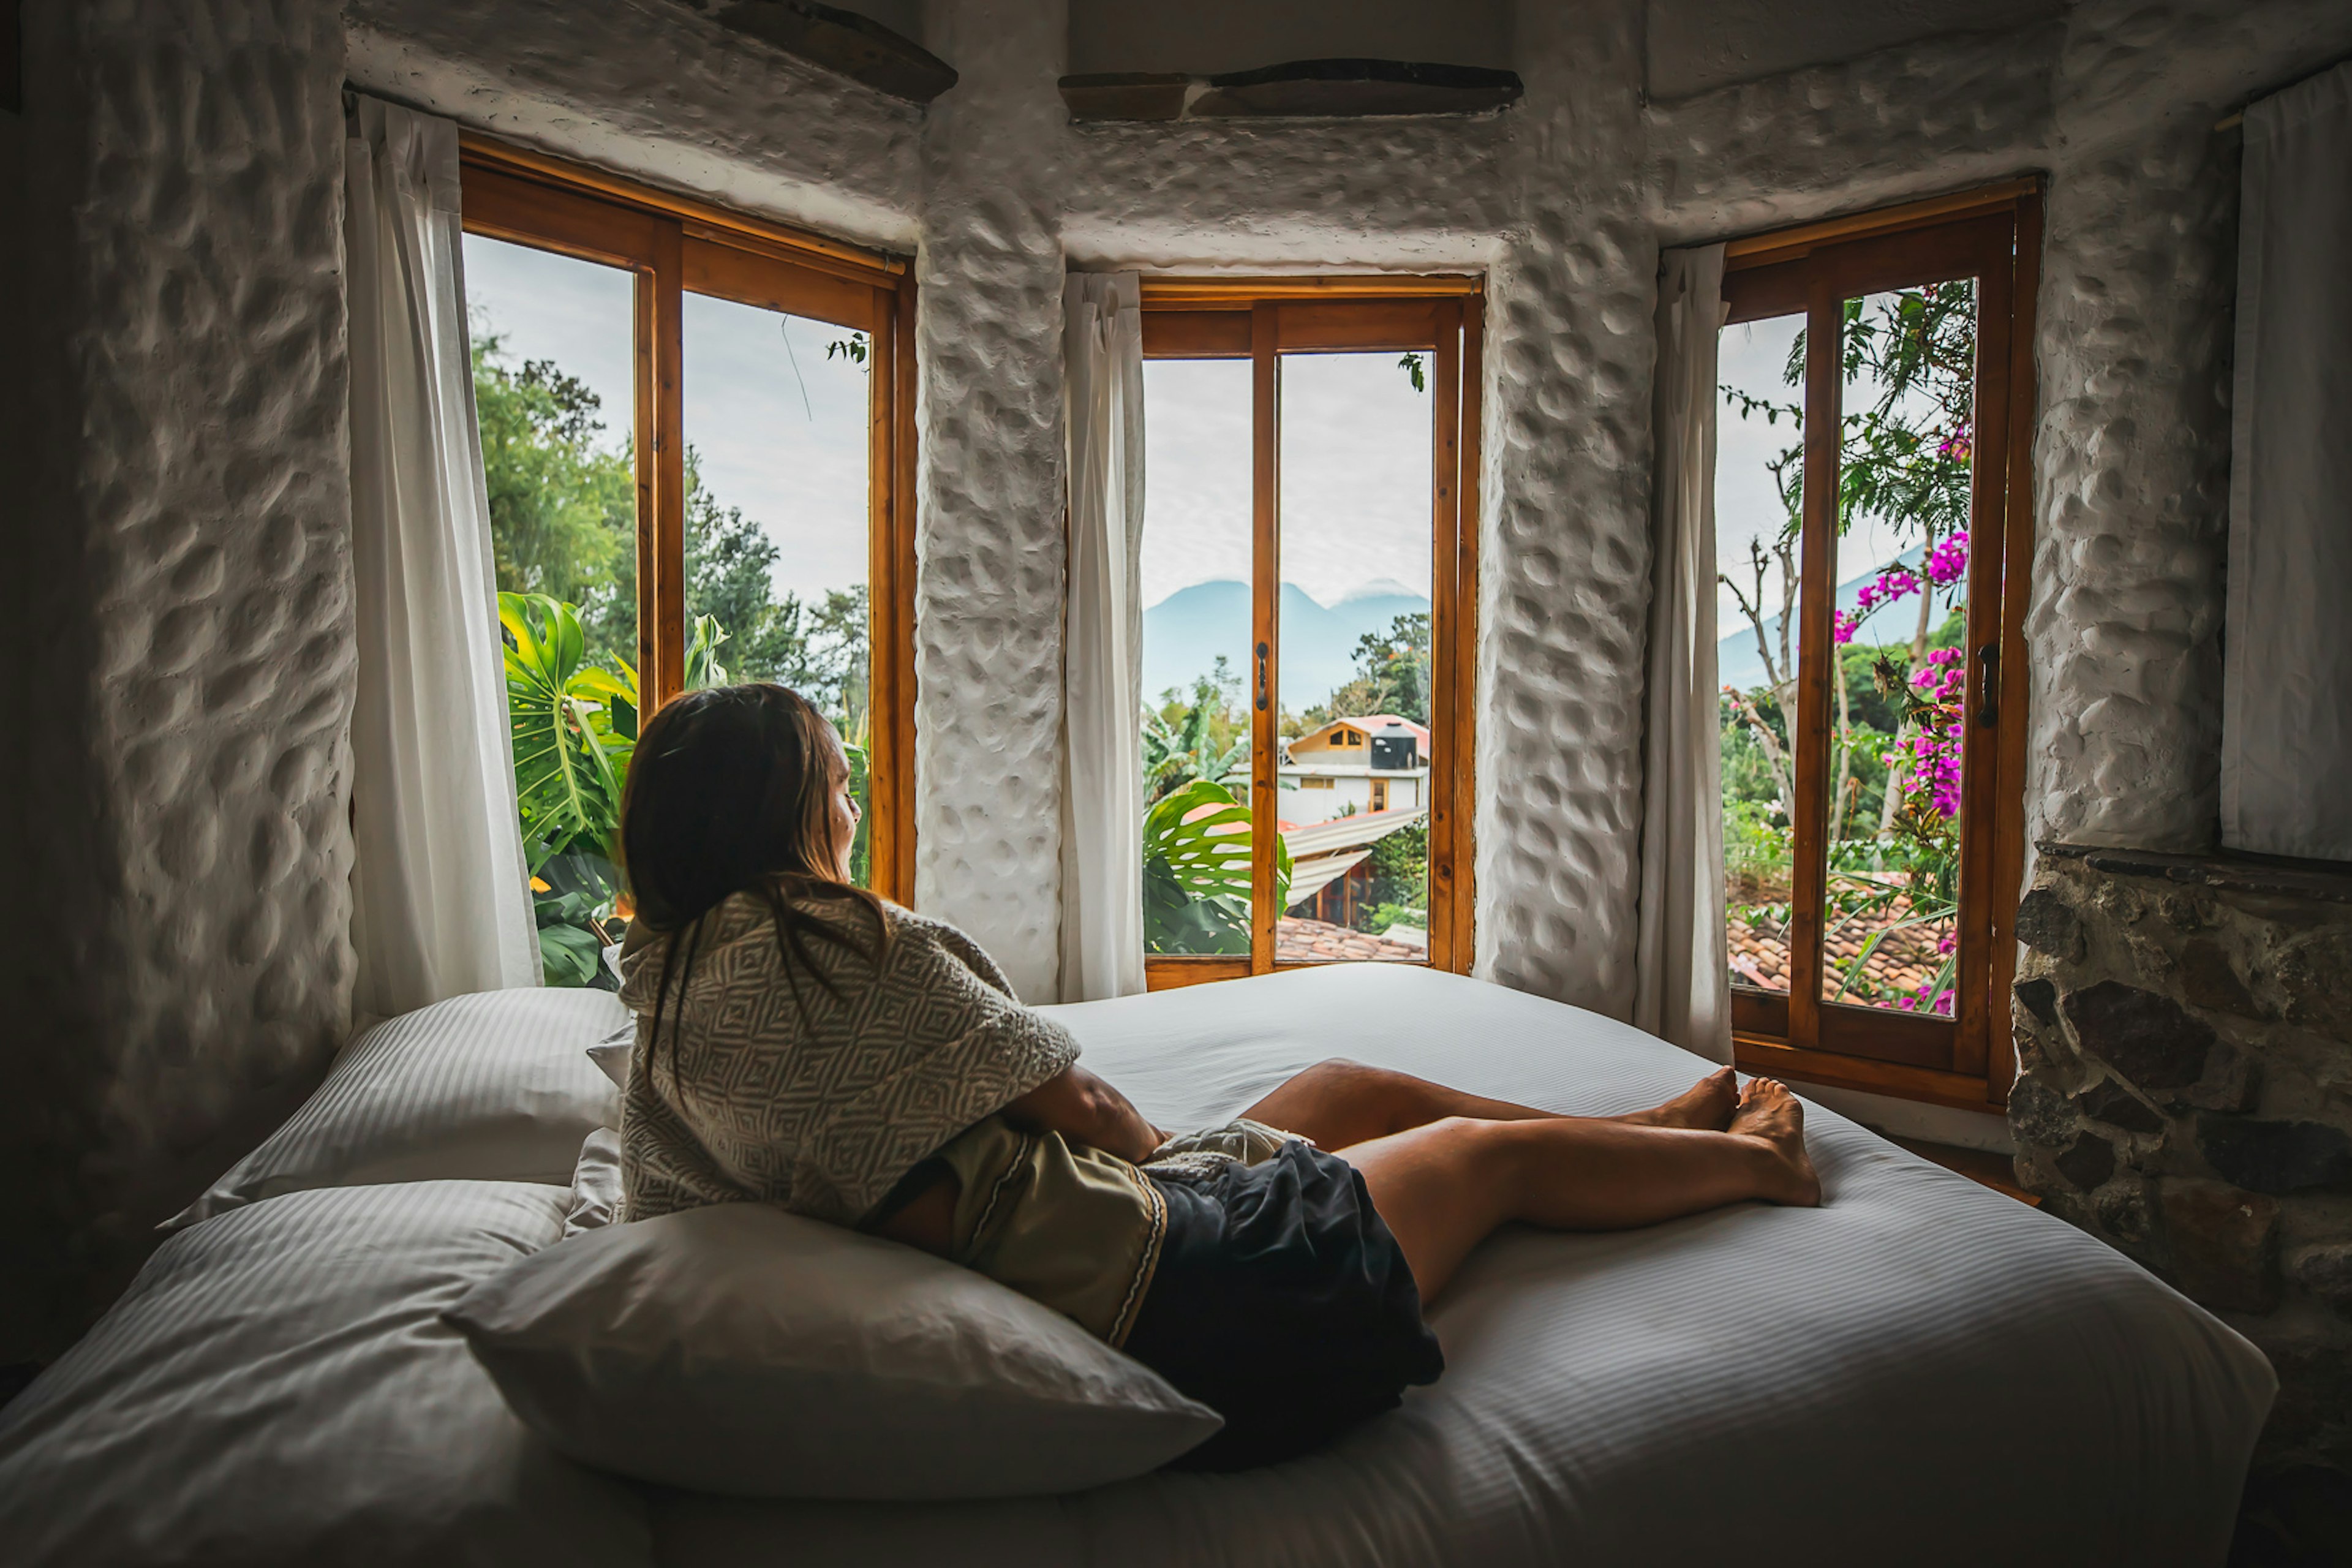 Views over unspoiled tropical scenes are part of the package at eco-lodges such as Lush Atitlan